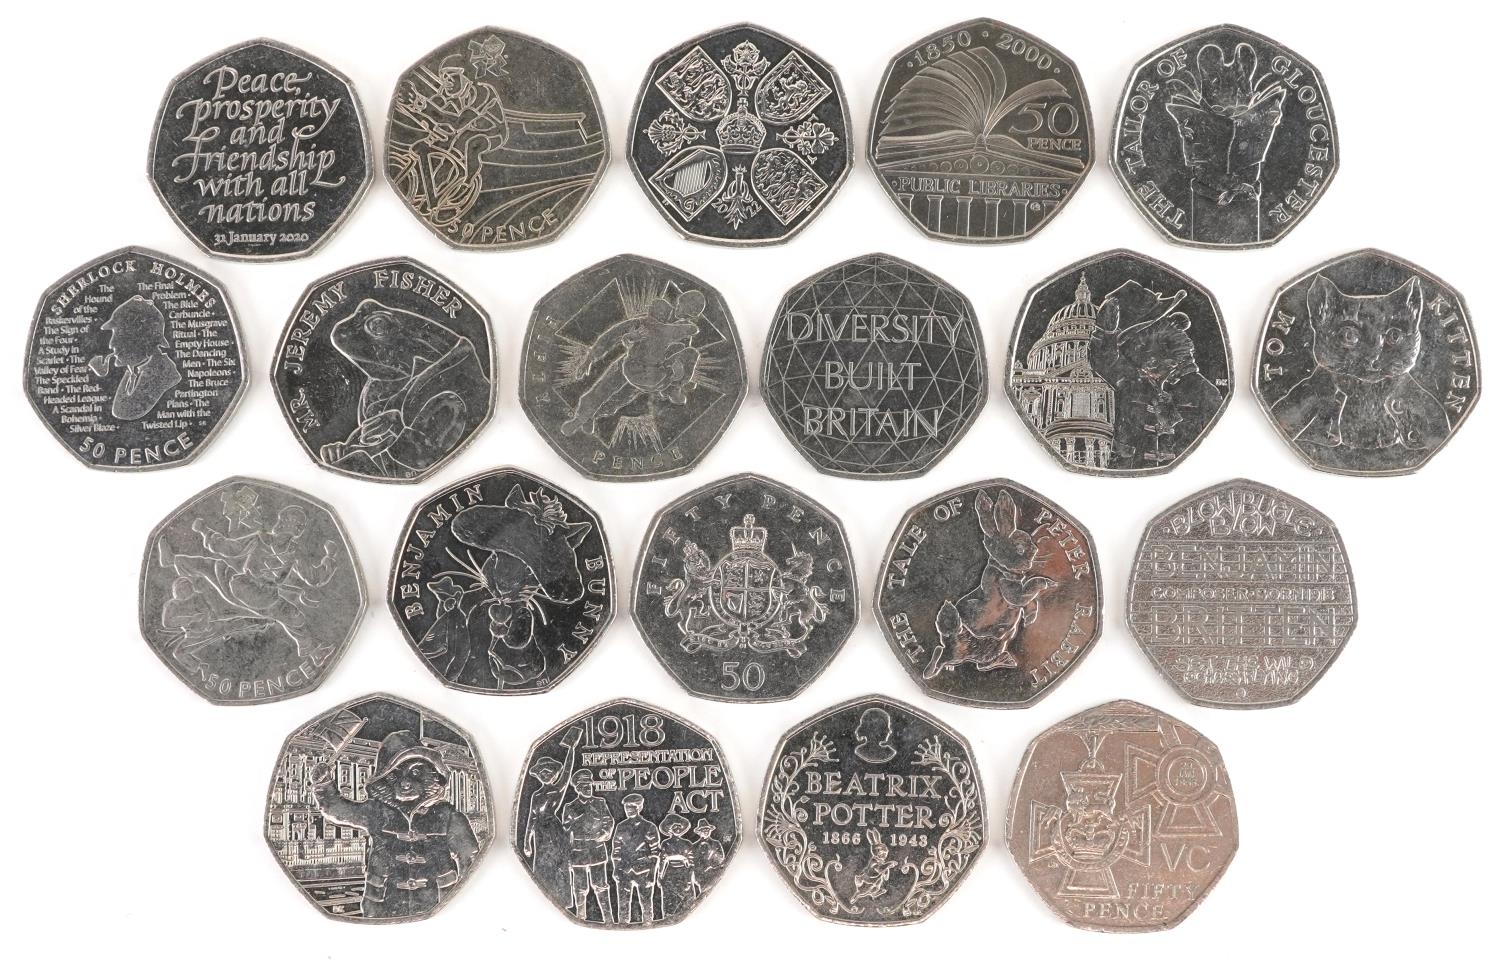 Twenty Elizabeth II fifty pence pieces, various designs including London 2012 Olympics and